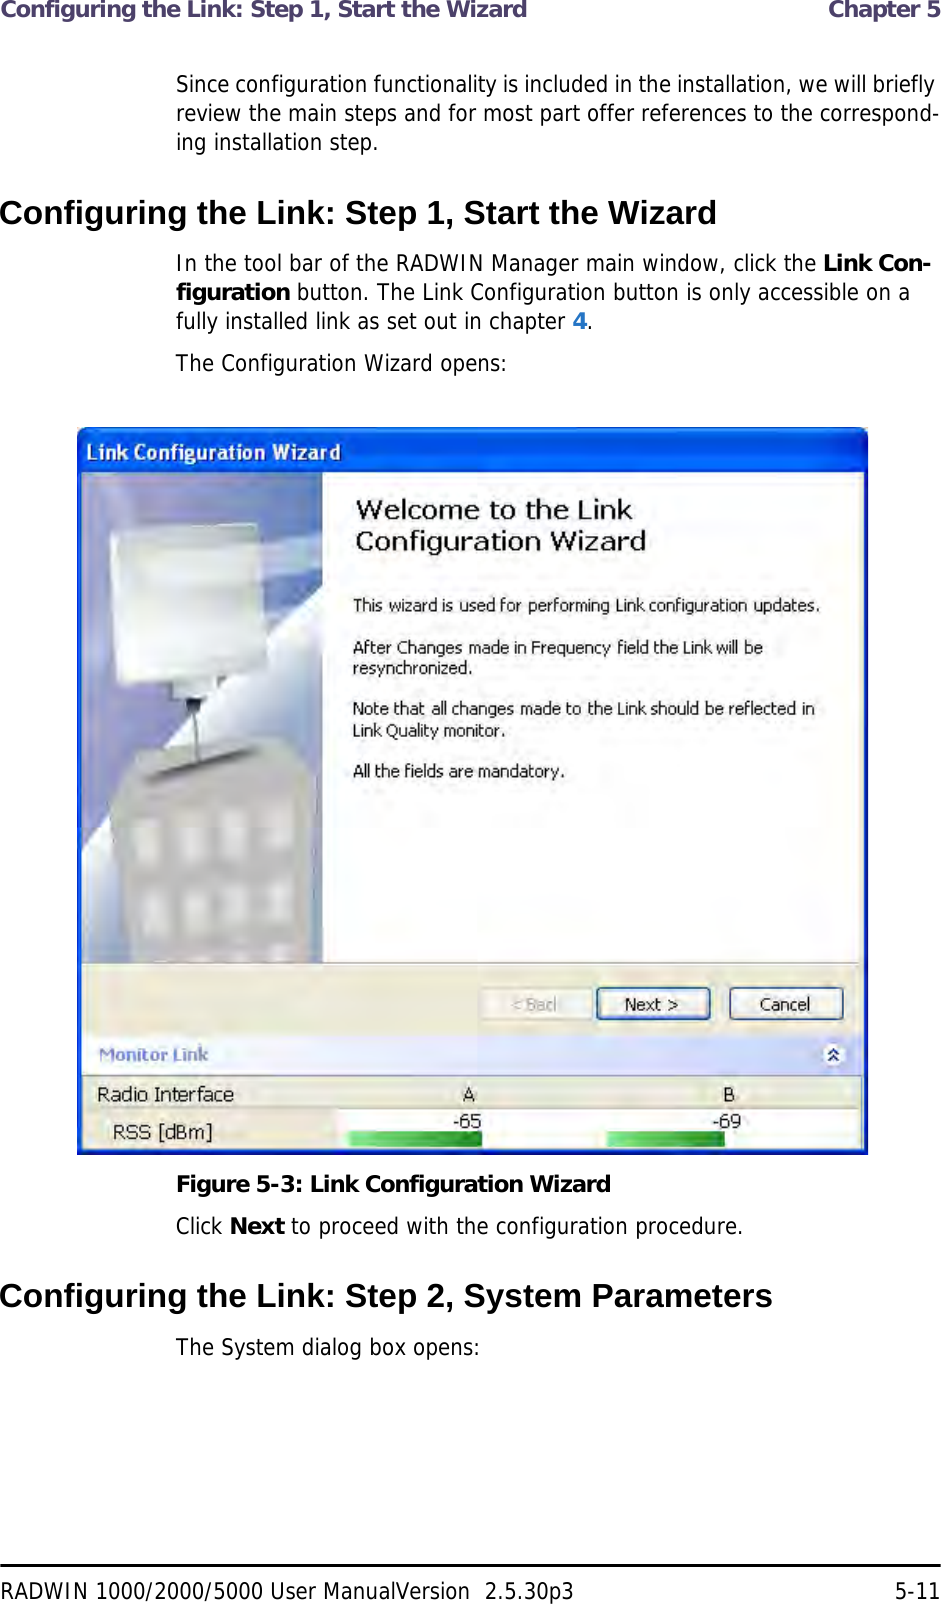 Configuring the Link: Step 1, Start the Wizard  Chapter 5RADWIN 1000/2000/5000 User ManualVersion  2.5.30p3 5-11Since configuration functionality is included in the installation, we will briefly review the main steps and for most part offer references to the correspond-ing installation step.Configuring the Link: Step 1, Start the WizardIn the tool bar of the RADWIN Manager main window, click the Link Con-figuration button. The Link Configuration button is only accessible on a fully installed link as set out in chapter 4.The Configuration Wizard opens:Figure 5-3: Link Configuration WizardClick Next to proceed with the configuration procedure.Configuring the Link: Step 2, System ParametersThe System dialog box opens: